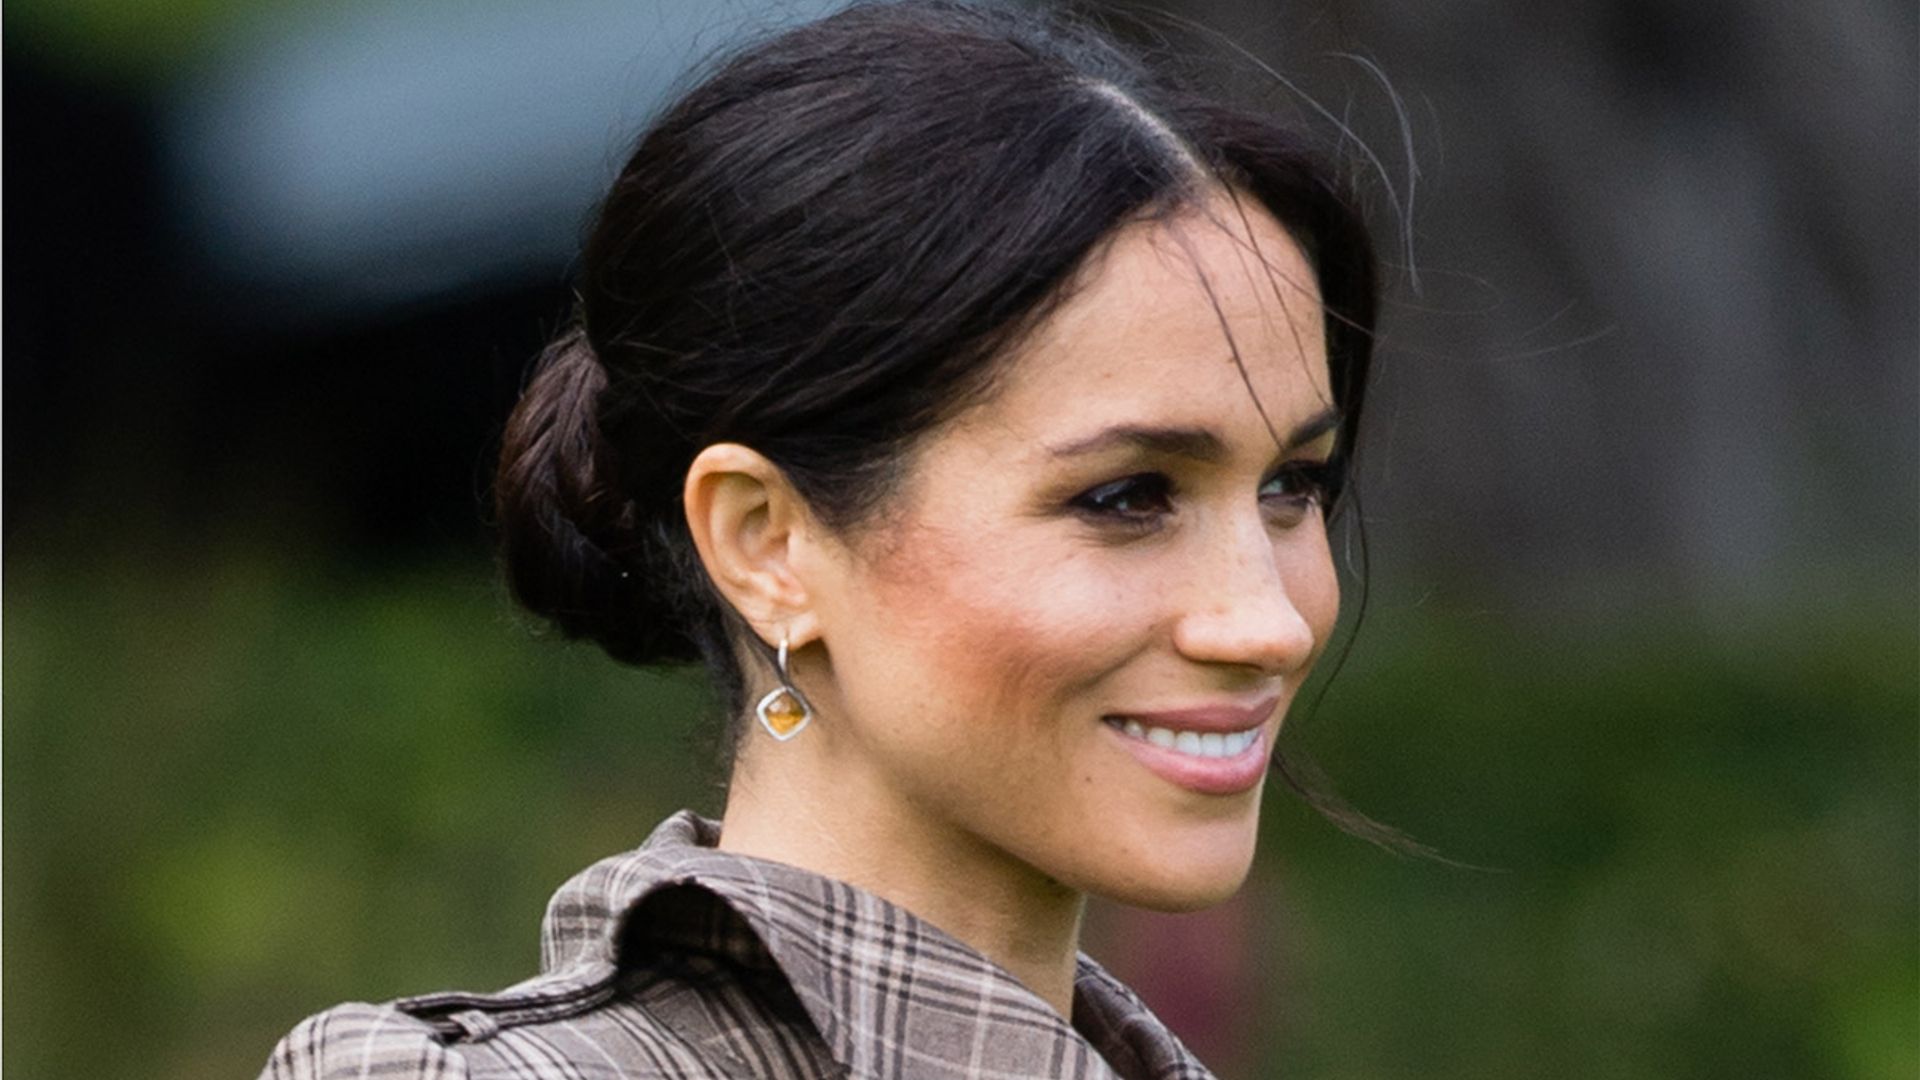 Meghan Markle's first famous royal handbag is finally available to buy